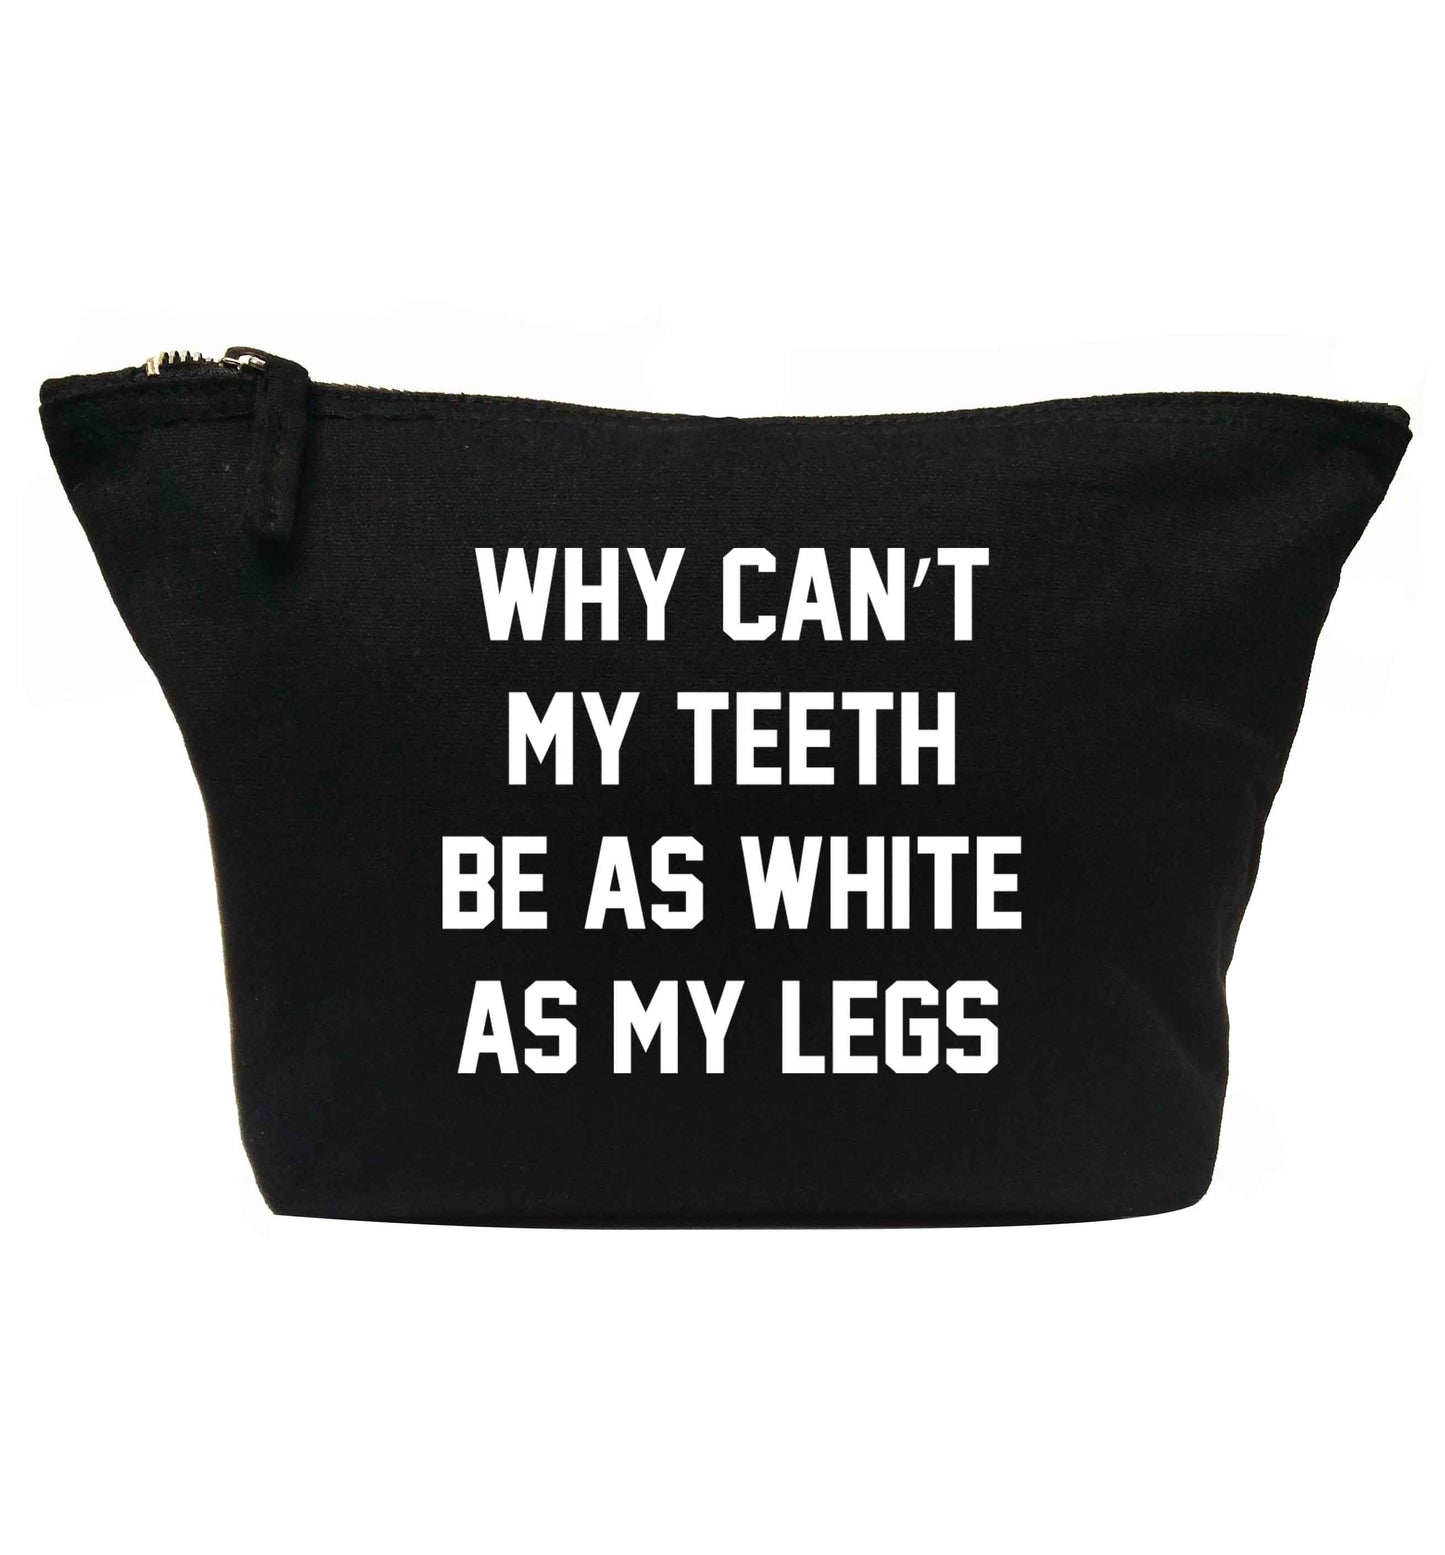 Why can't my teeth be as white as my legs | makeup / wash bag